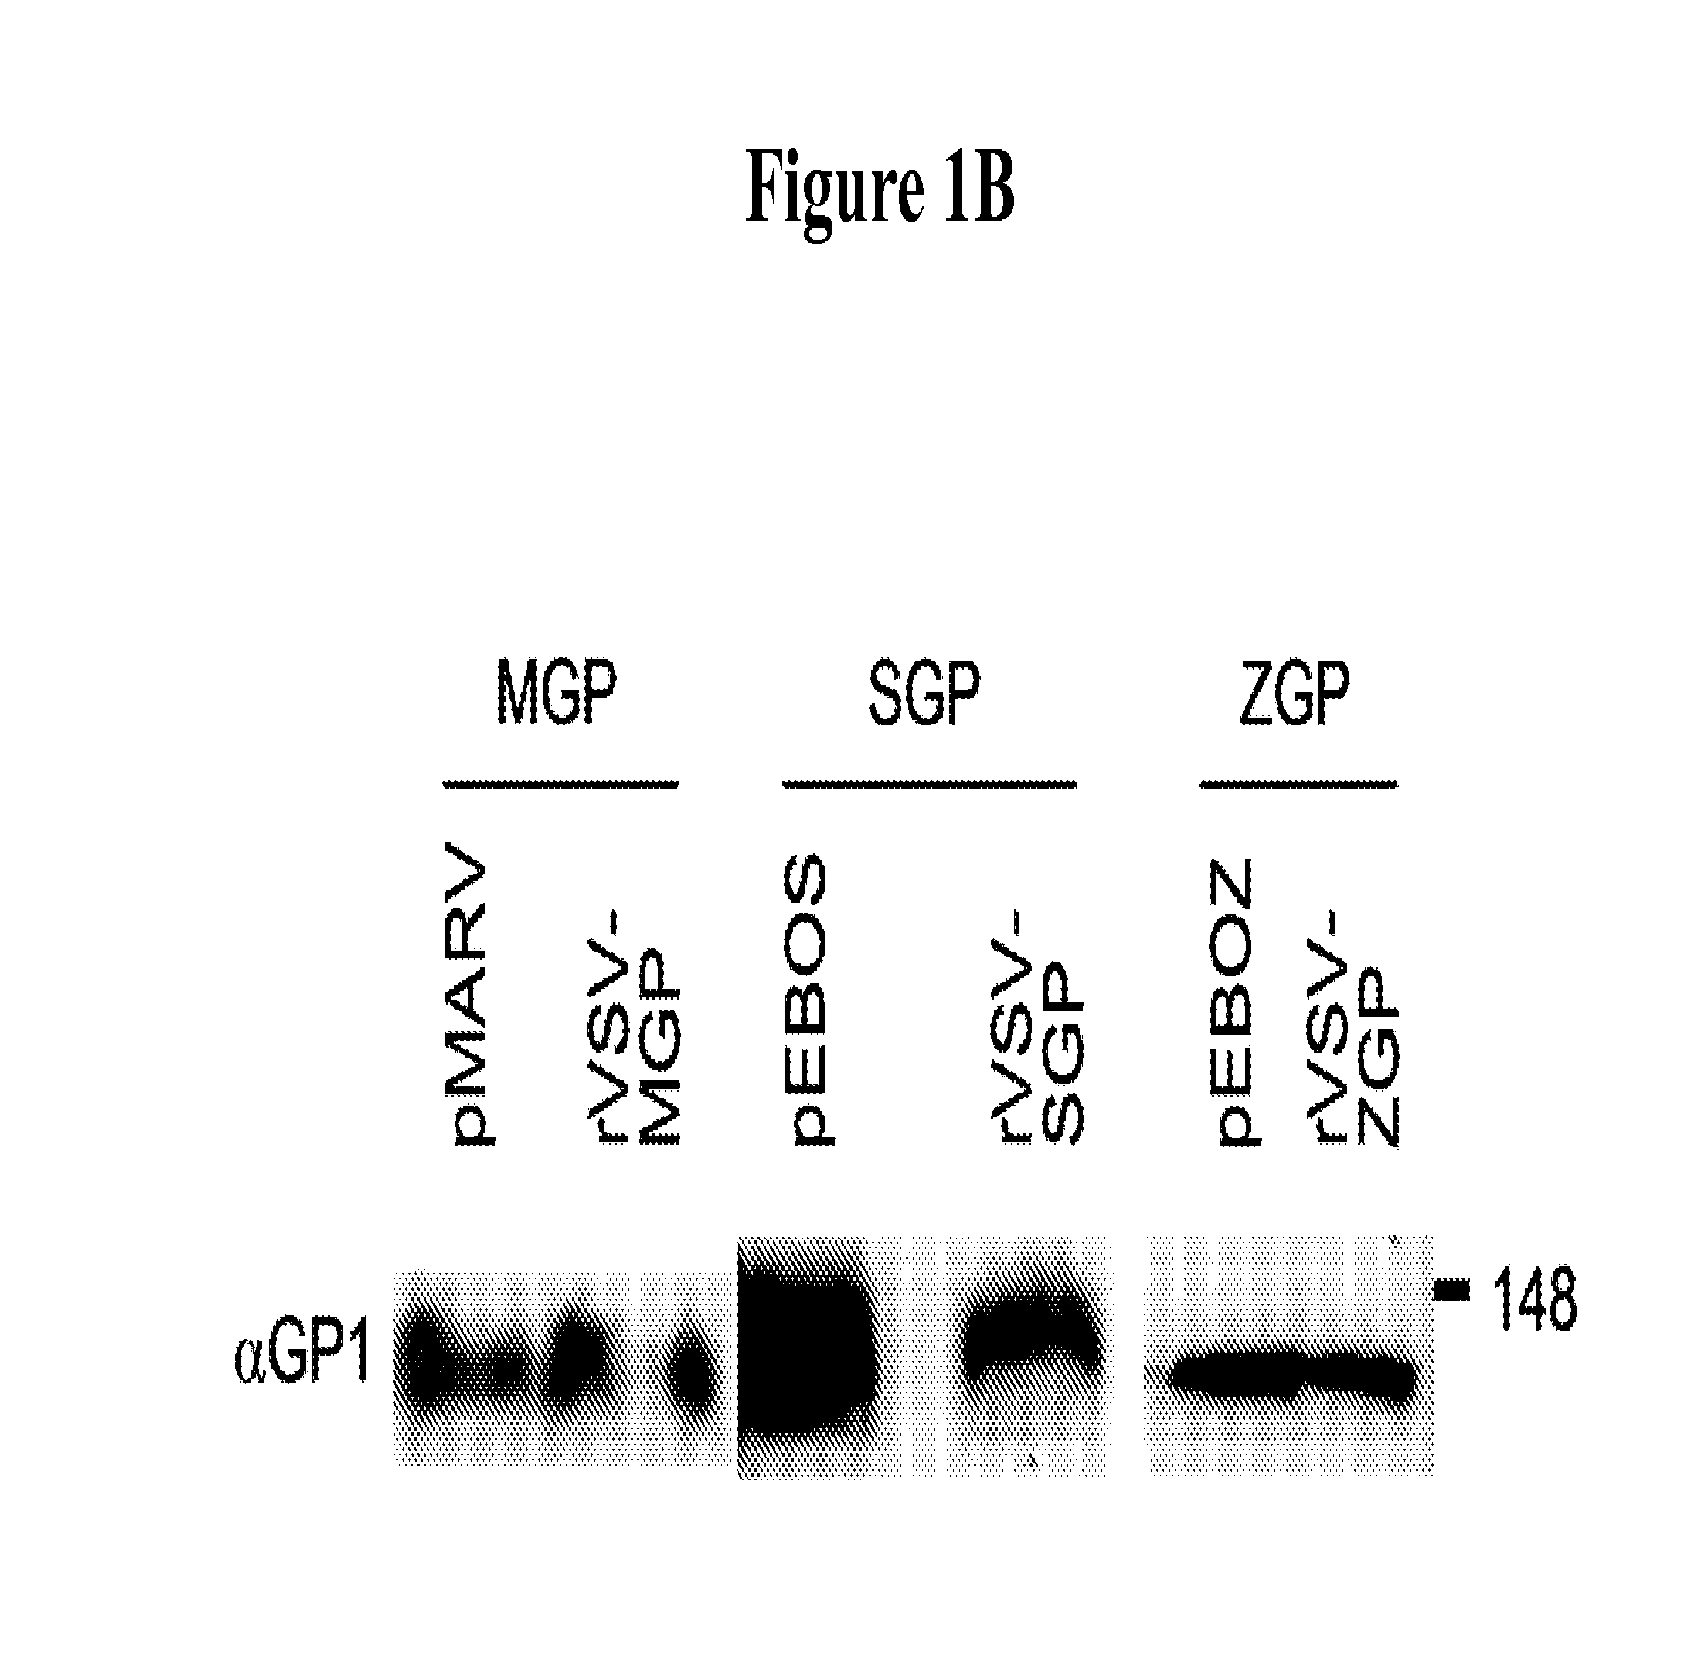 Filovirus Consensus Antigens, Nucleic Acid Constructs And Vaccines Made Therefrom, And Methods Of Using Same